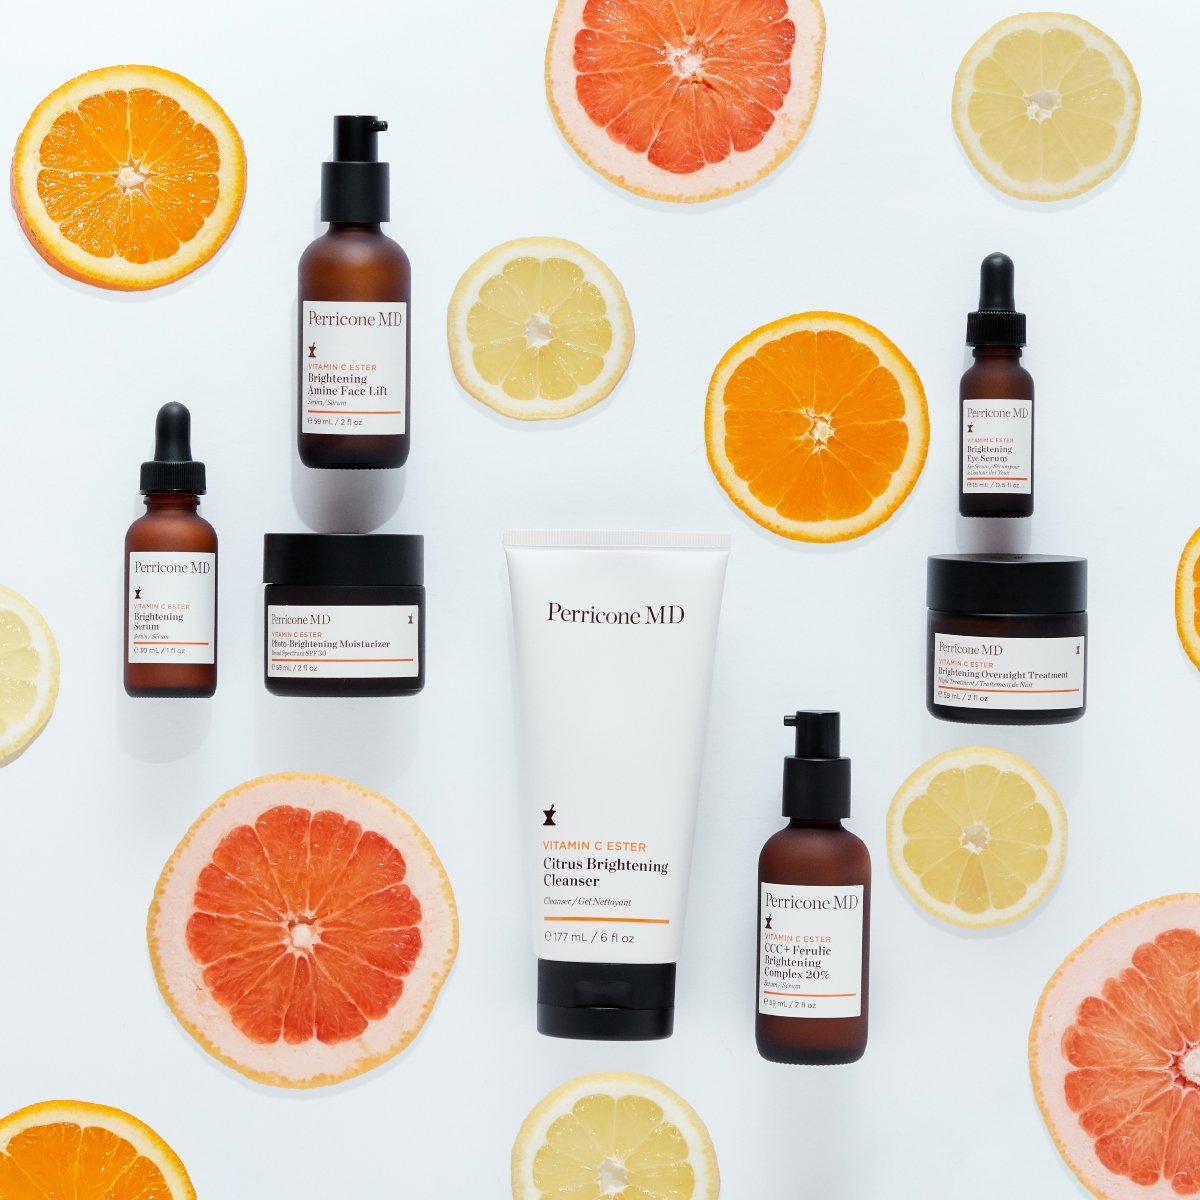 Perricone vitamin C r=products with oranges